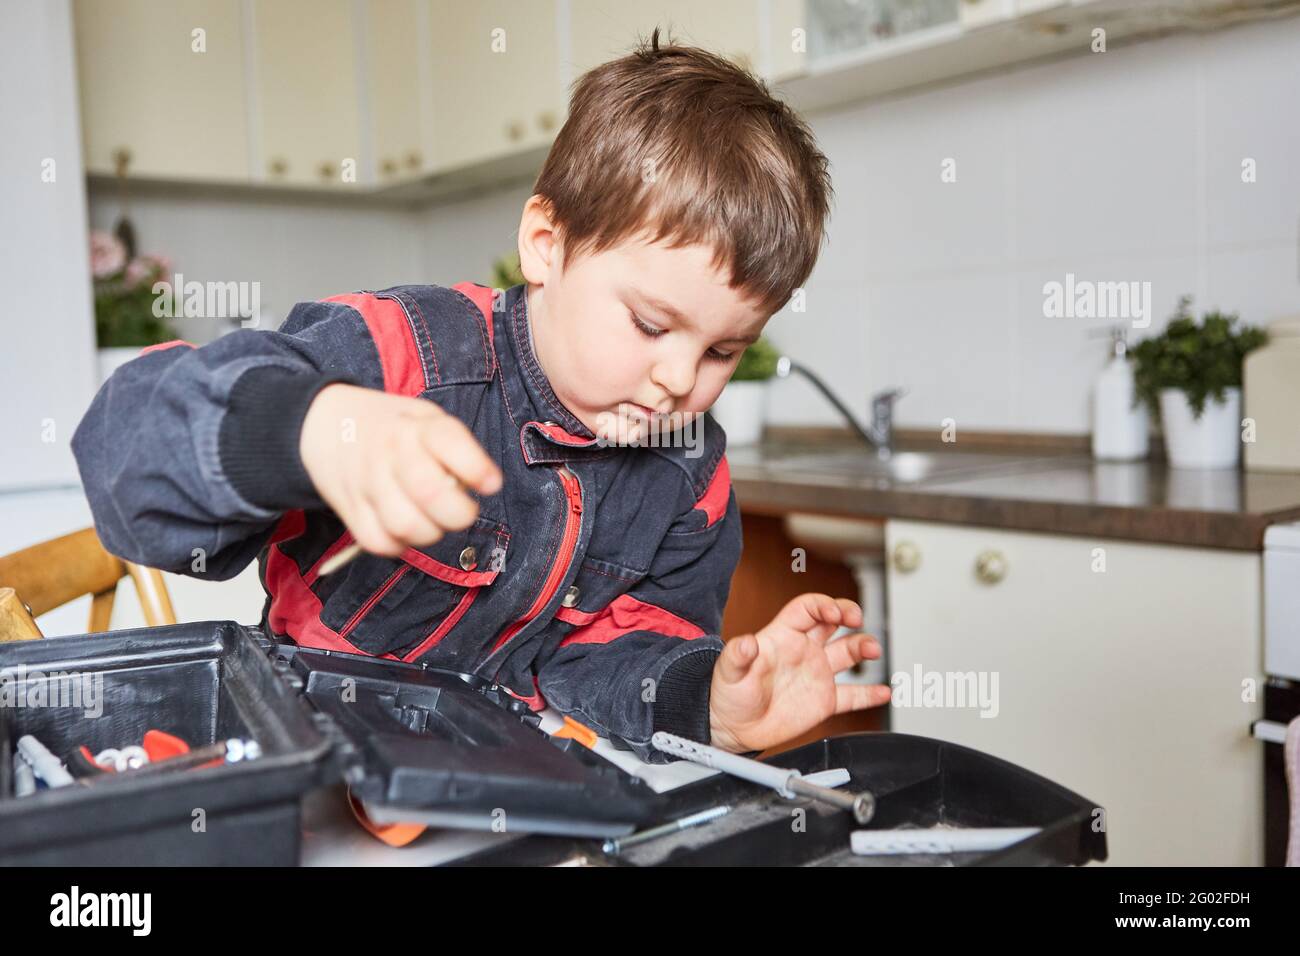 Boy is looking for tools in the toolbox while handyman playing in the kitchen Stock Photo